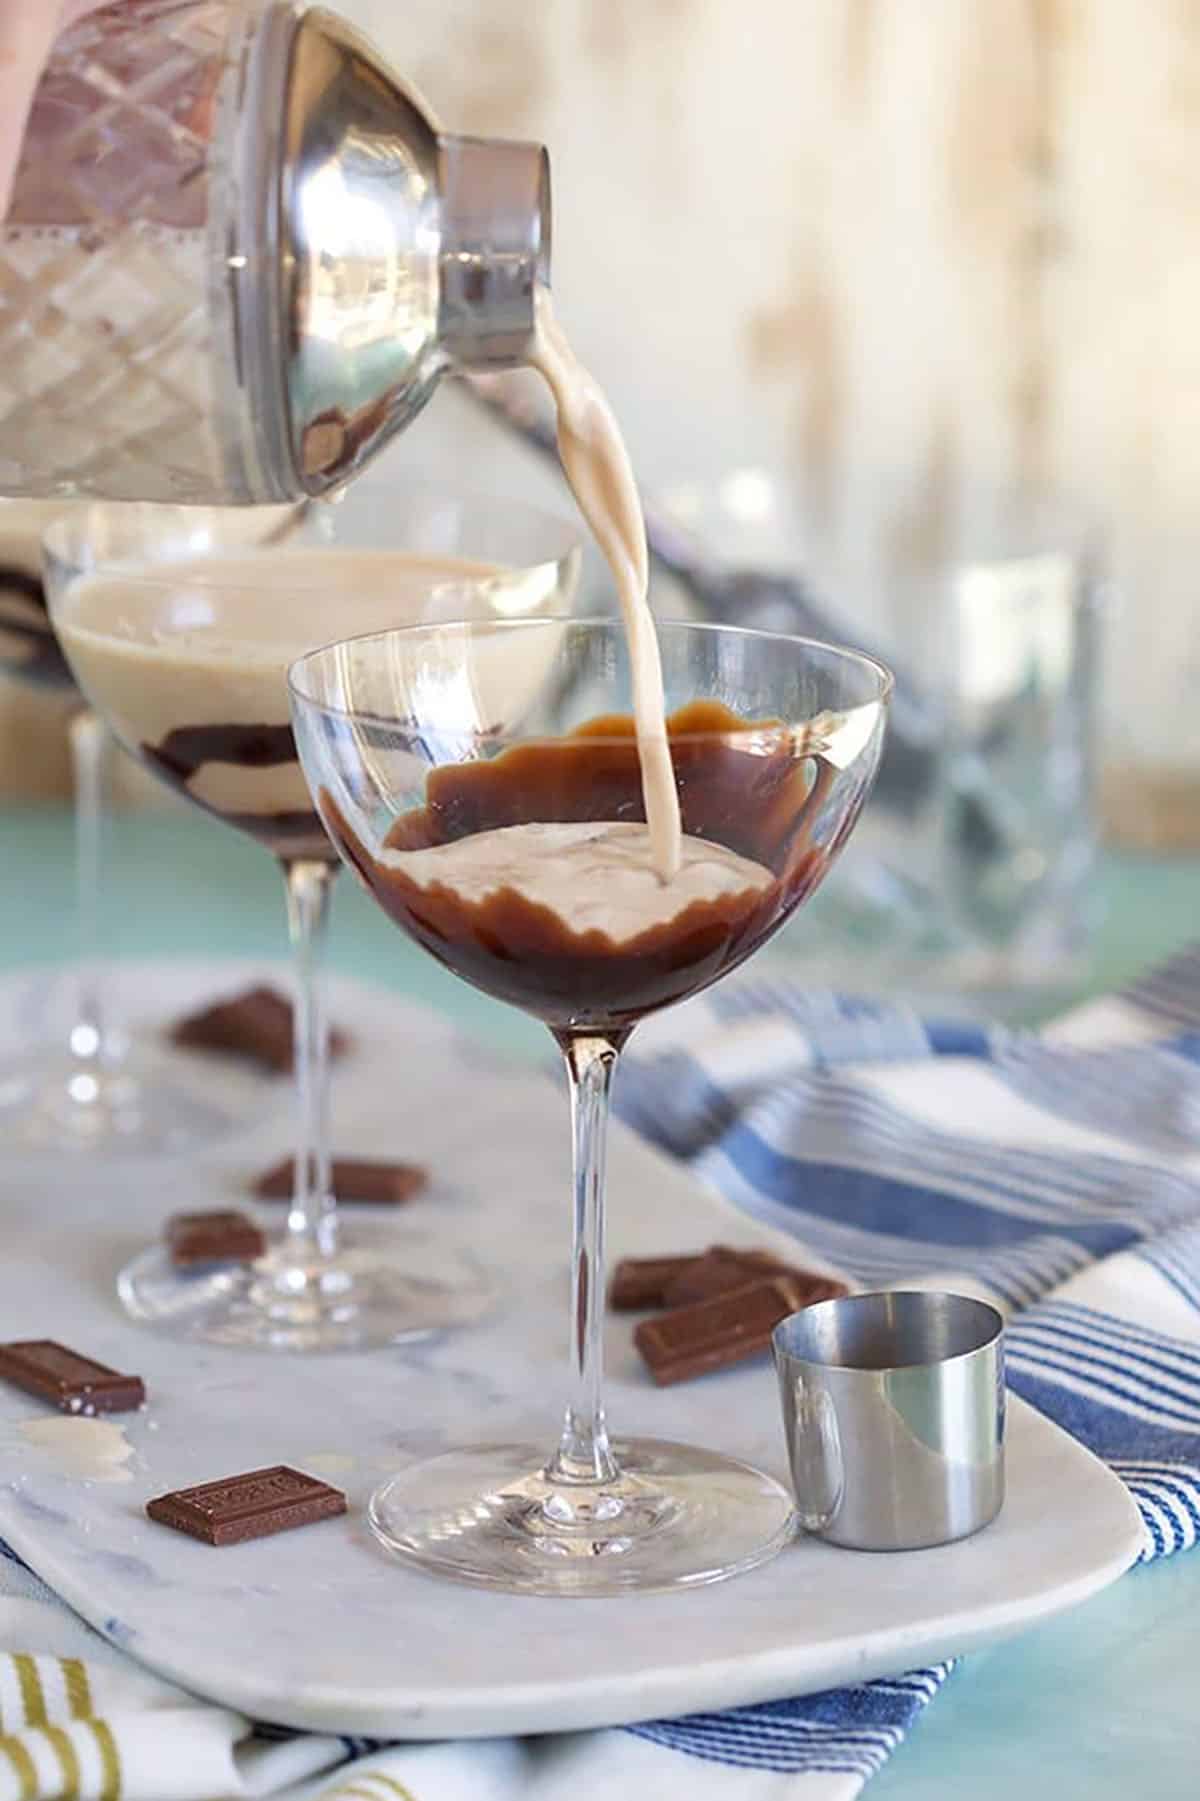 Chocolate Martini being poured into a martini glass with chocolate sauce swirled in the glass.